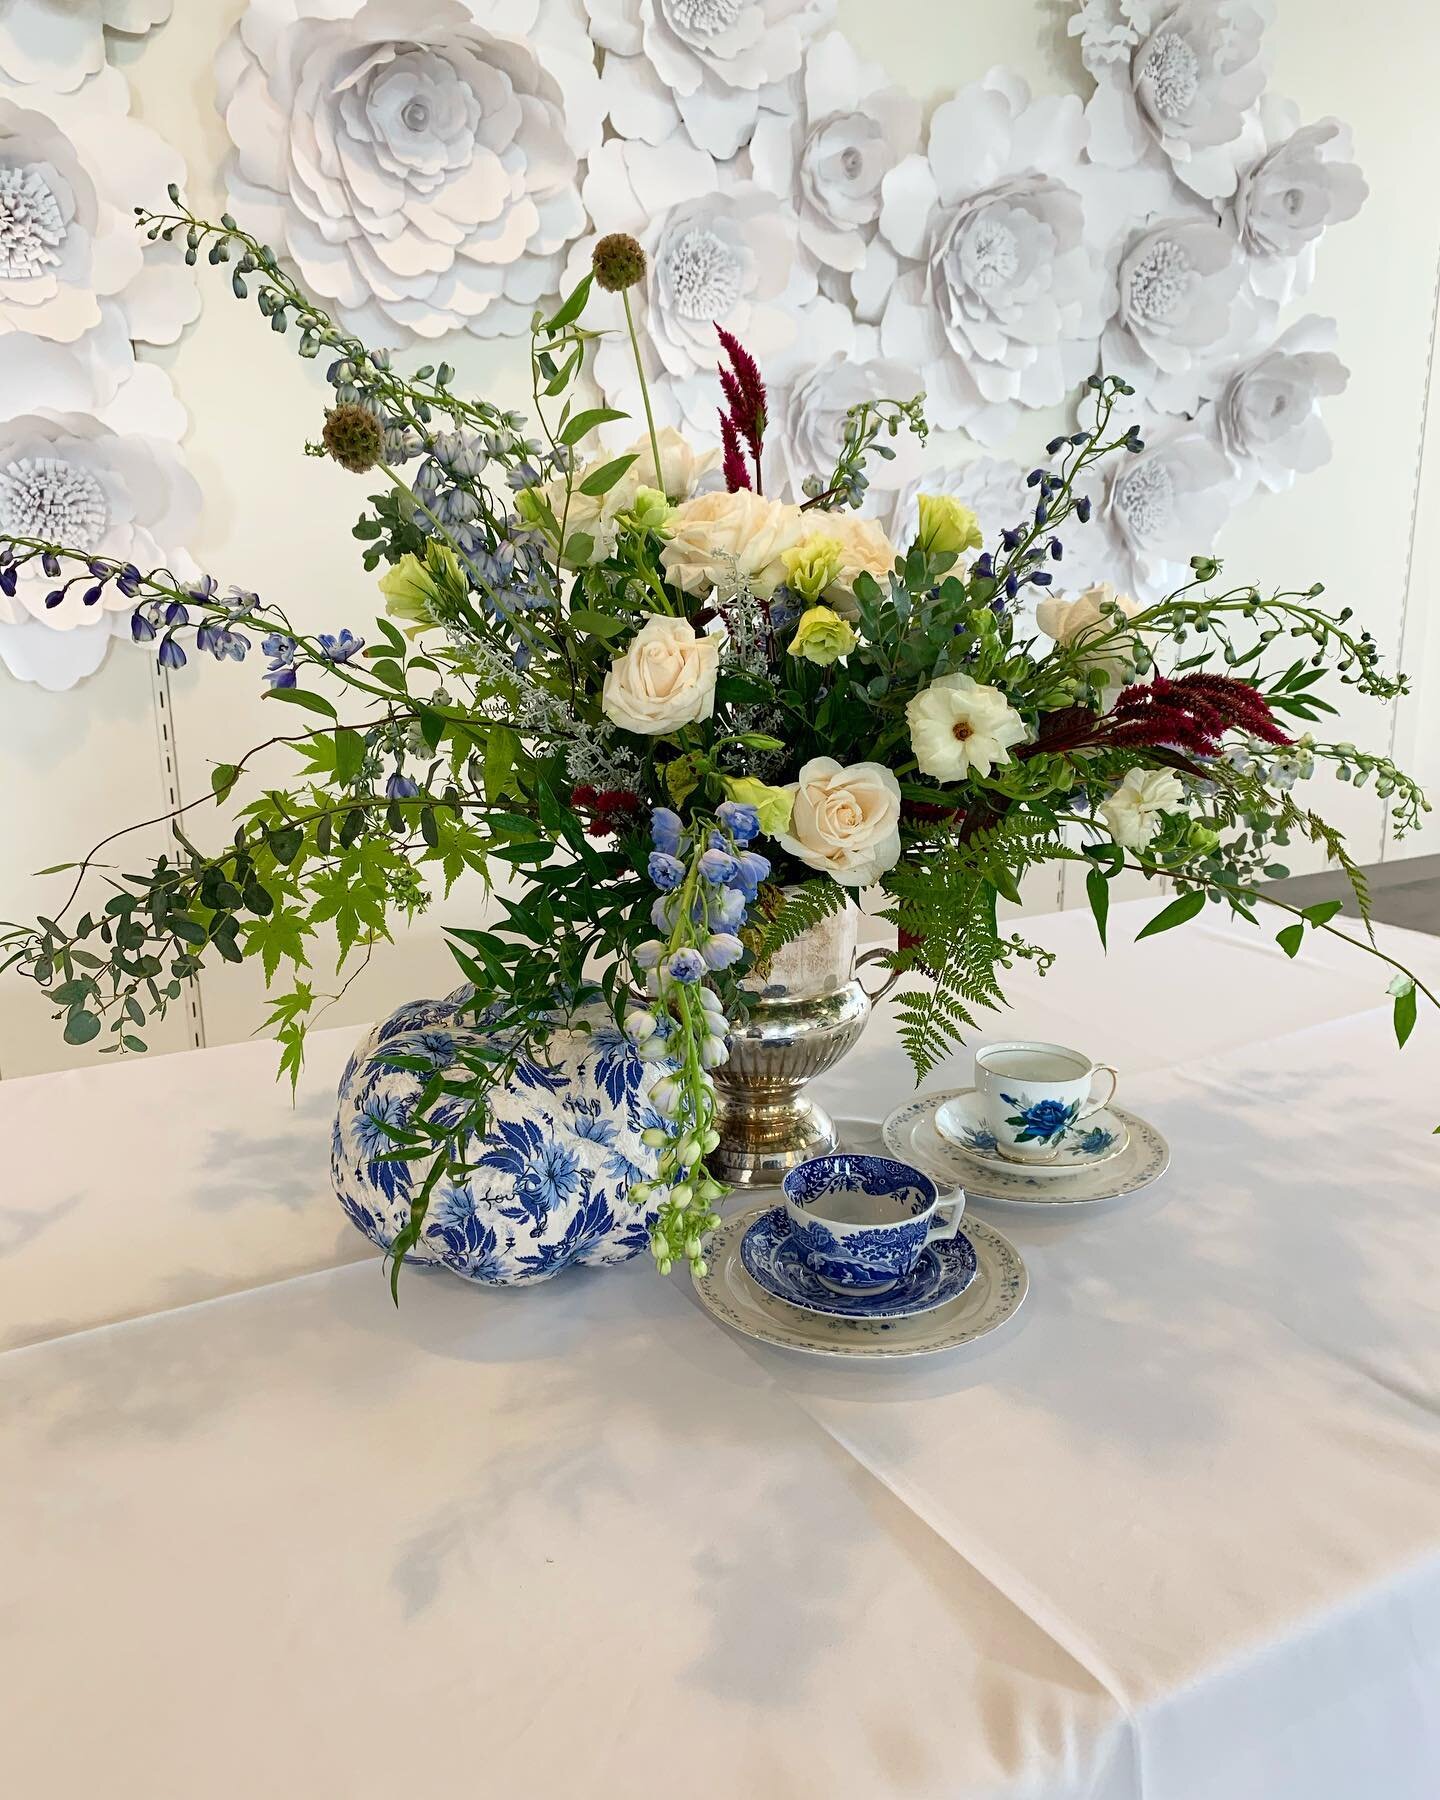 Beautiful florals paired with the perfect selection of exquisite china - what&rsquo;s not to love?  Here we have carefully selected blooms designed to complement the china for a special mom-to-be&rsquo;s baby shower.  The venue @lightbox209 showcased